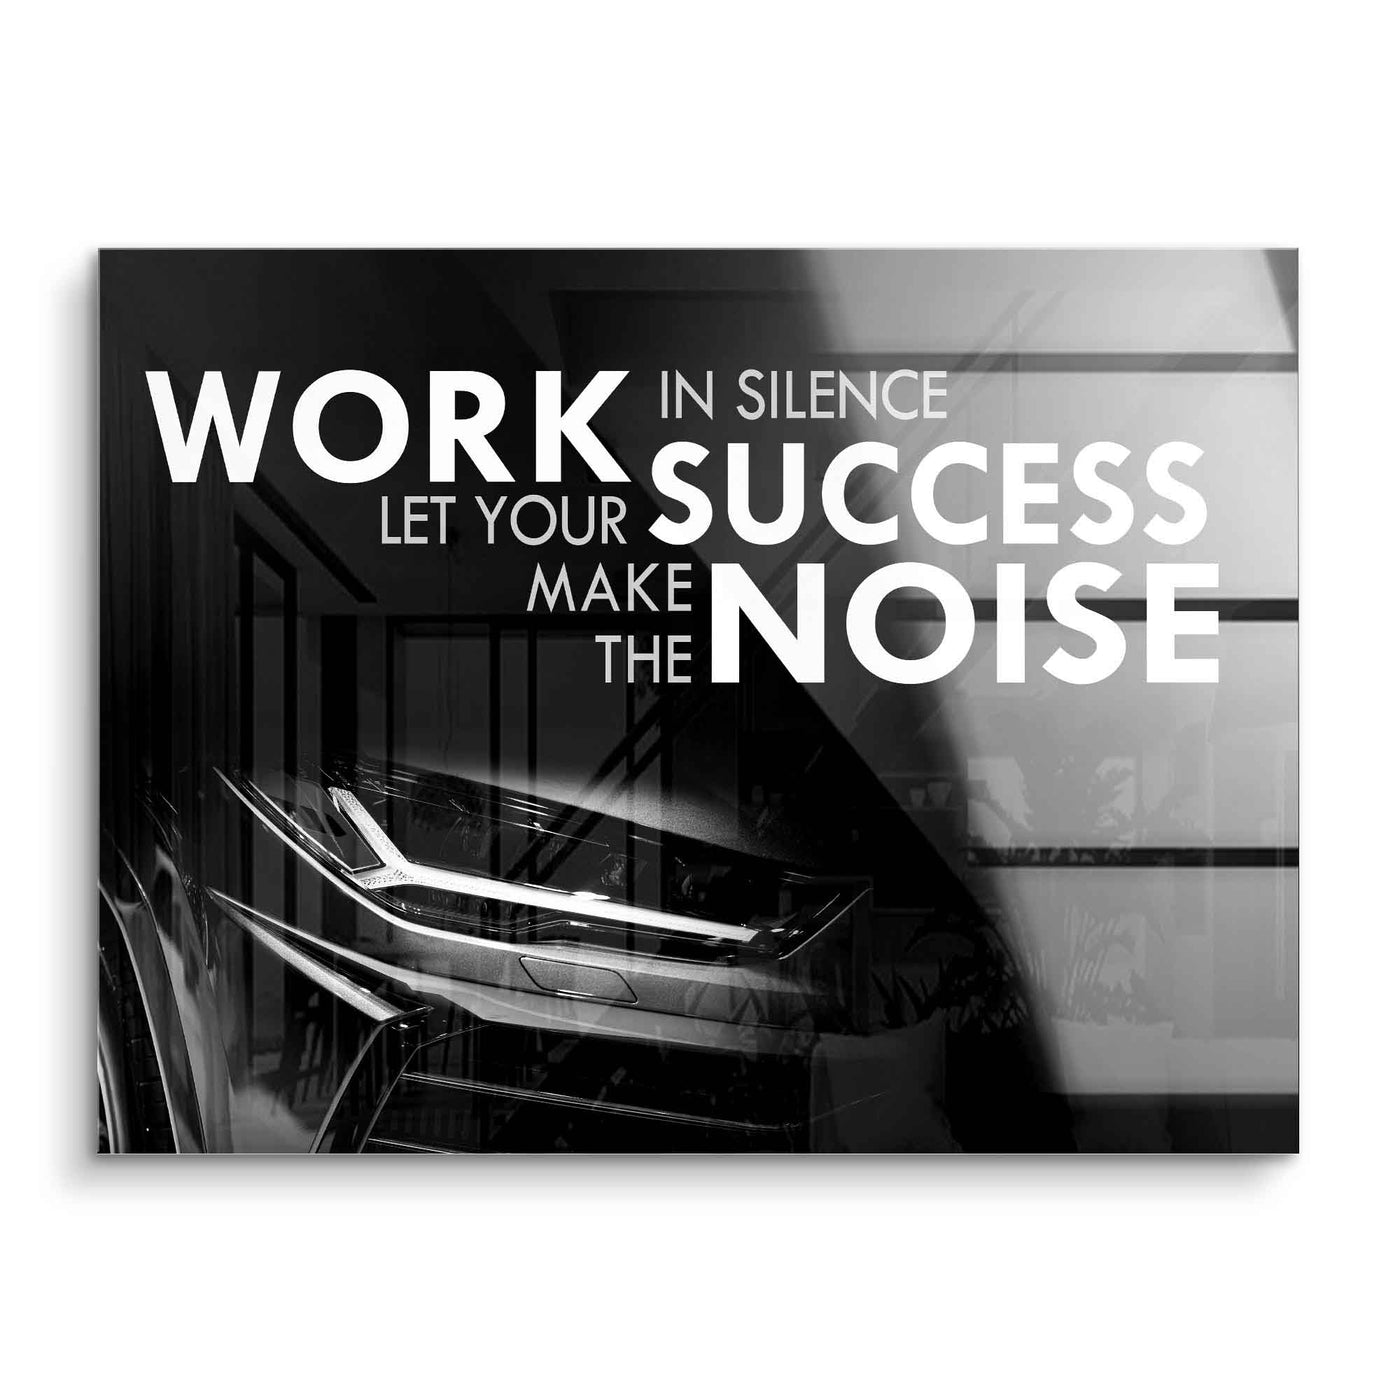 Let your success make the noise